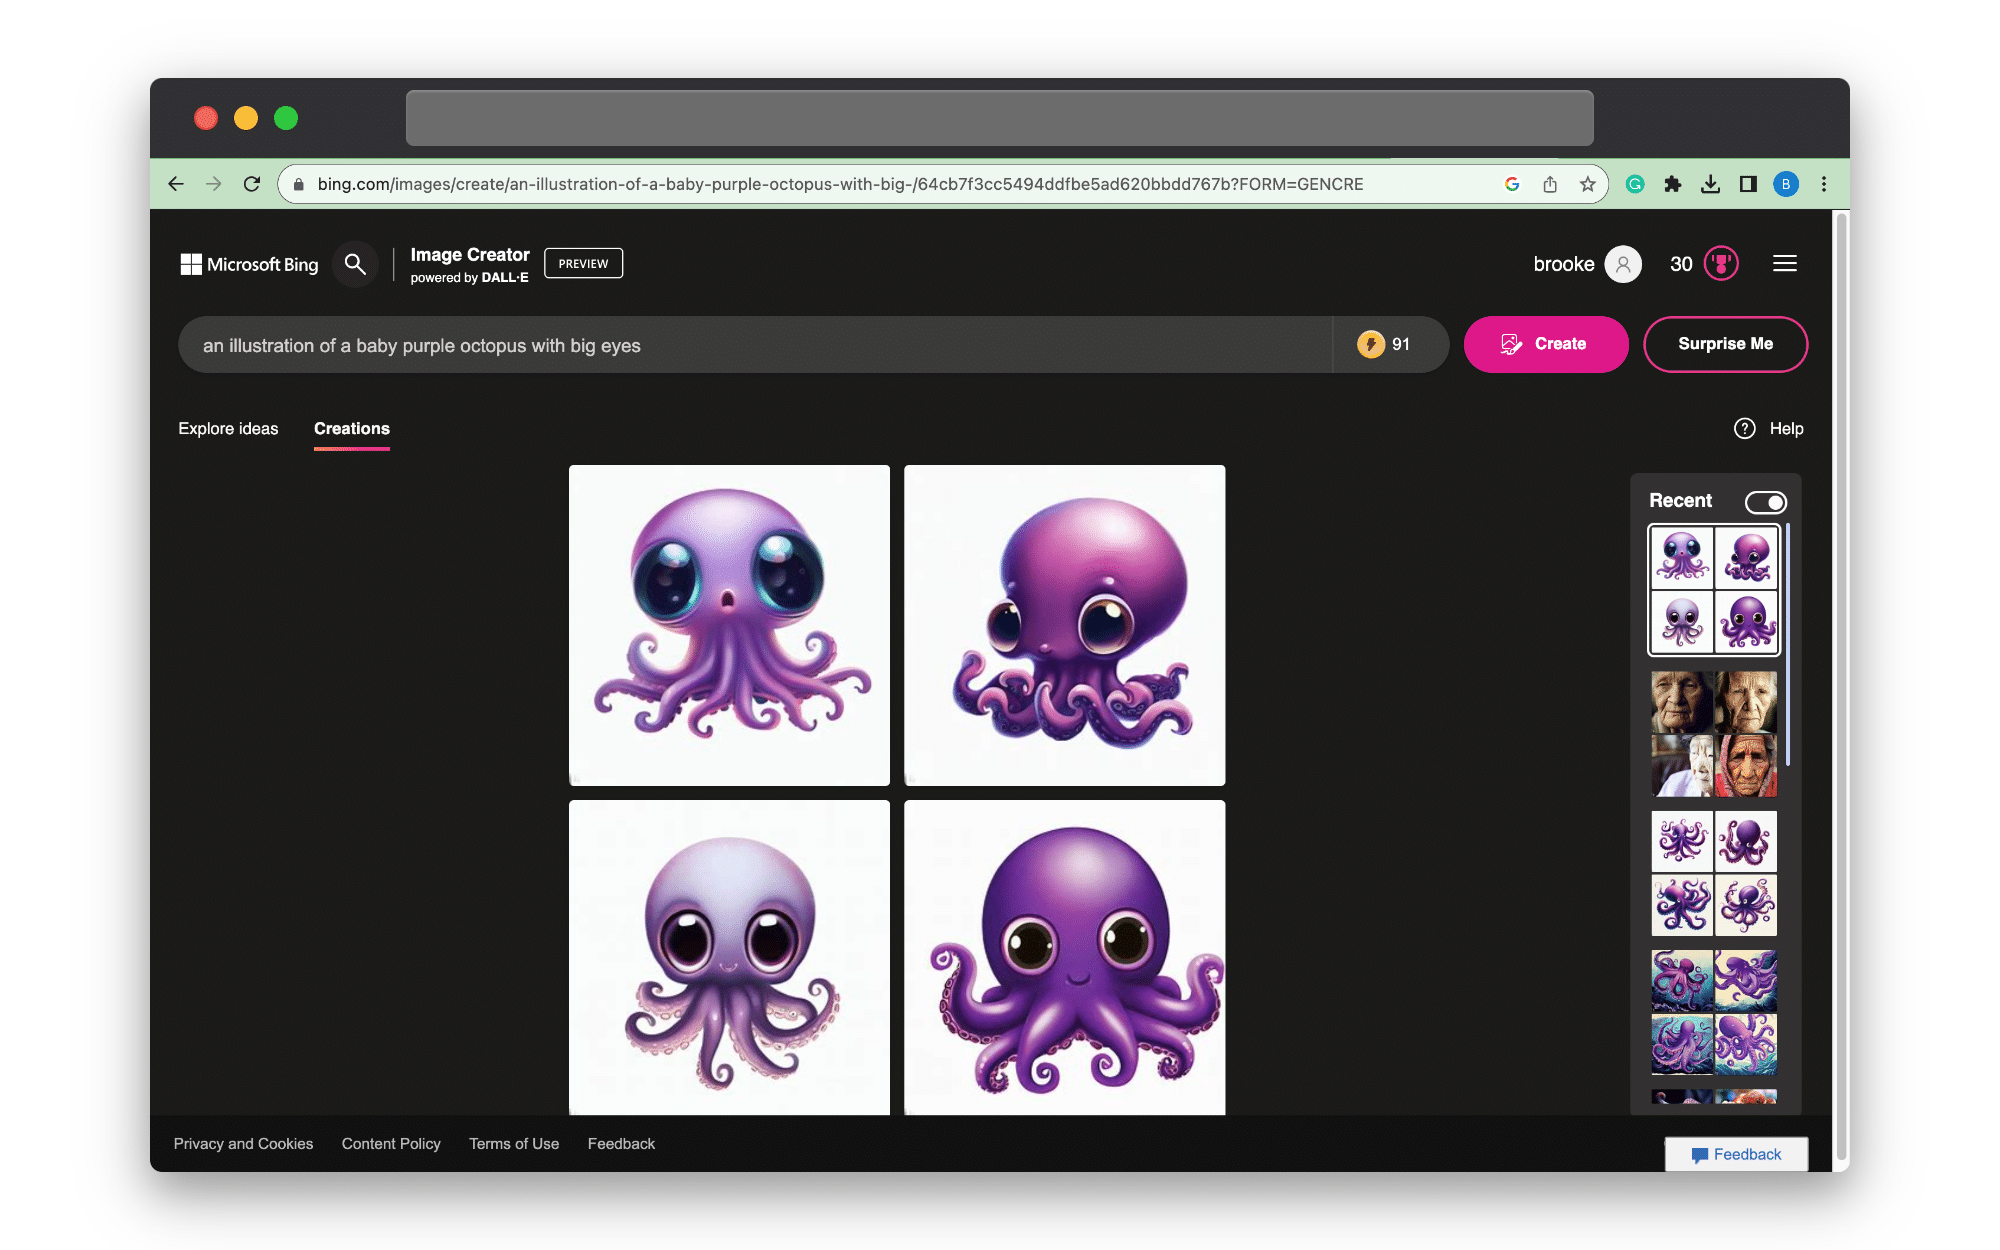 'an illustration of a baby purple octopus with big eyes'